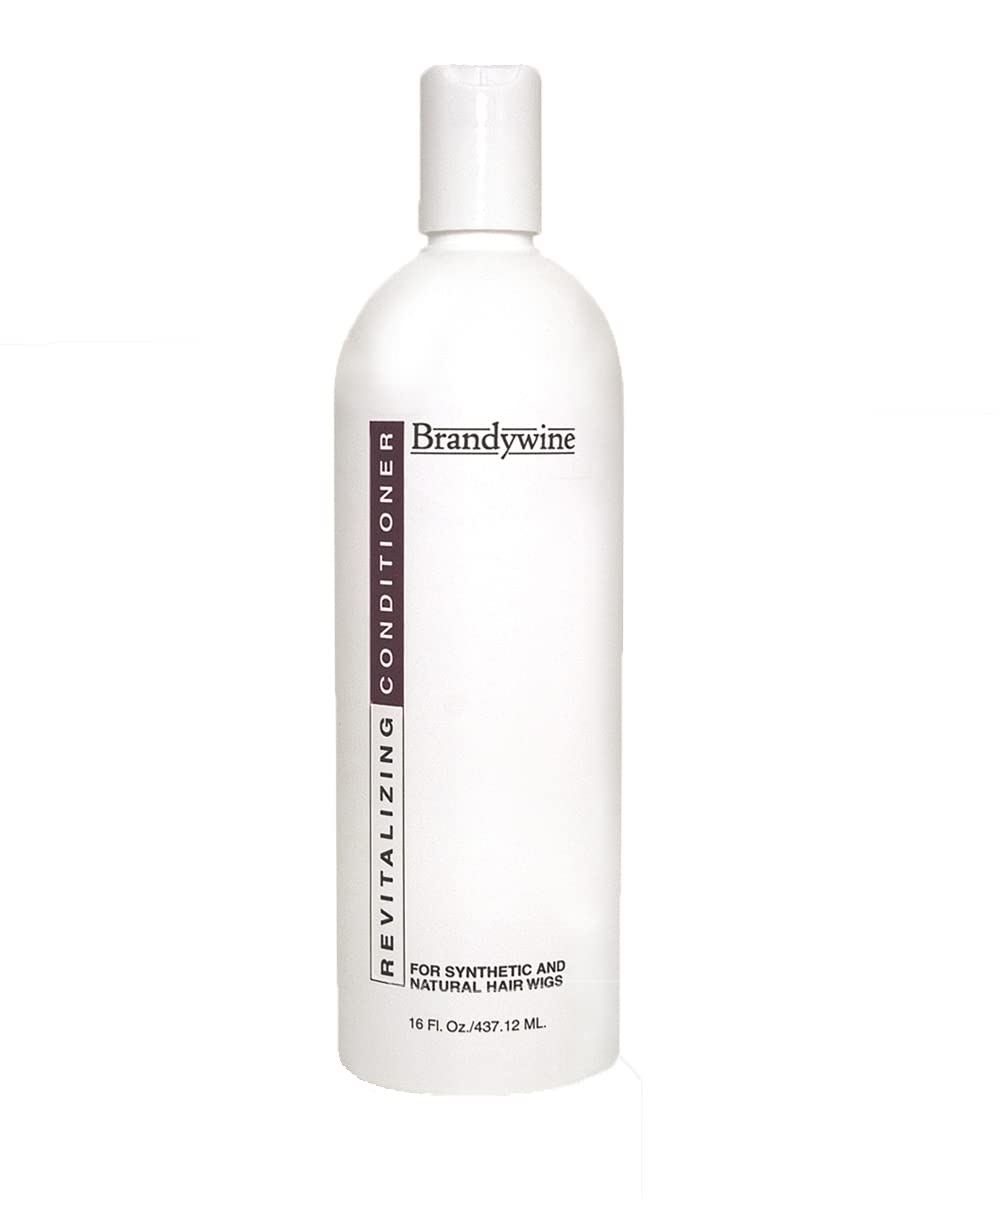 Brandywine Revitalizing Conditioner for Synthetic and Natural Hair Wigs, 8 Ounce